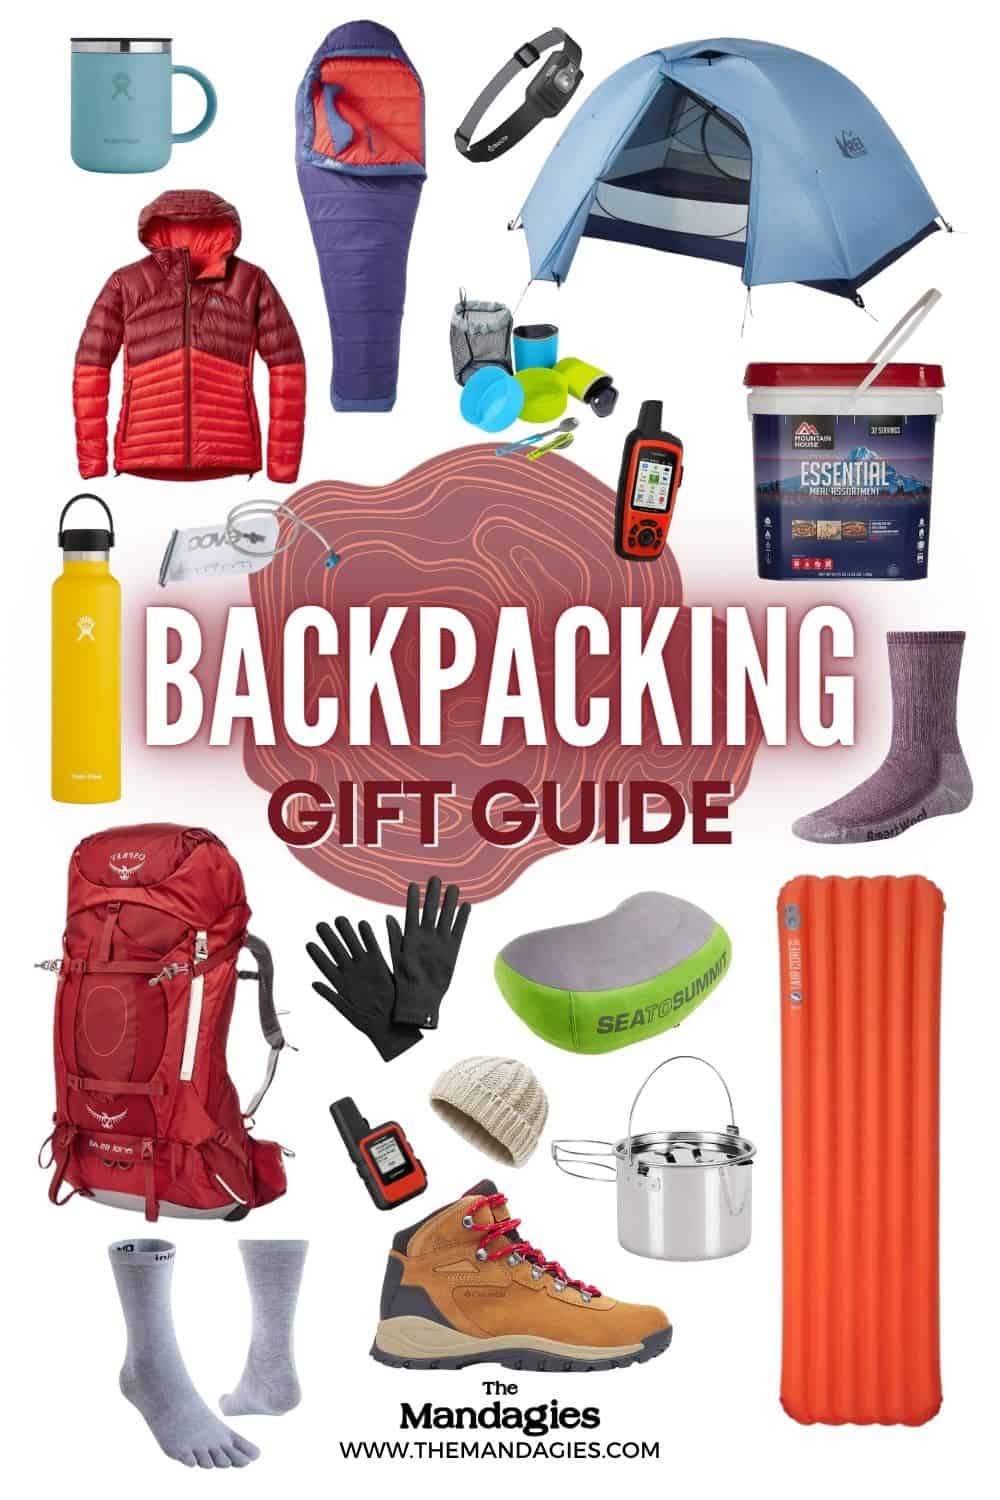 The Complete Guide To Your Beginner Backpacking Gear List - The Mandagies